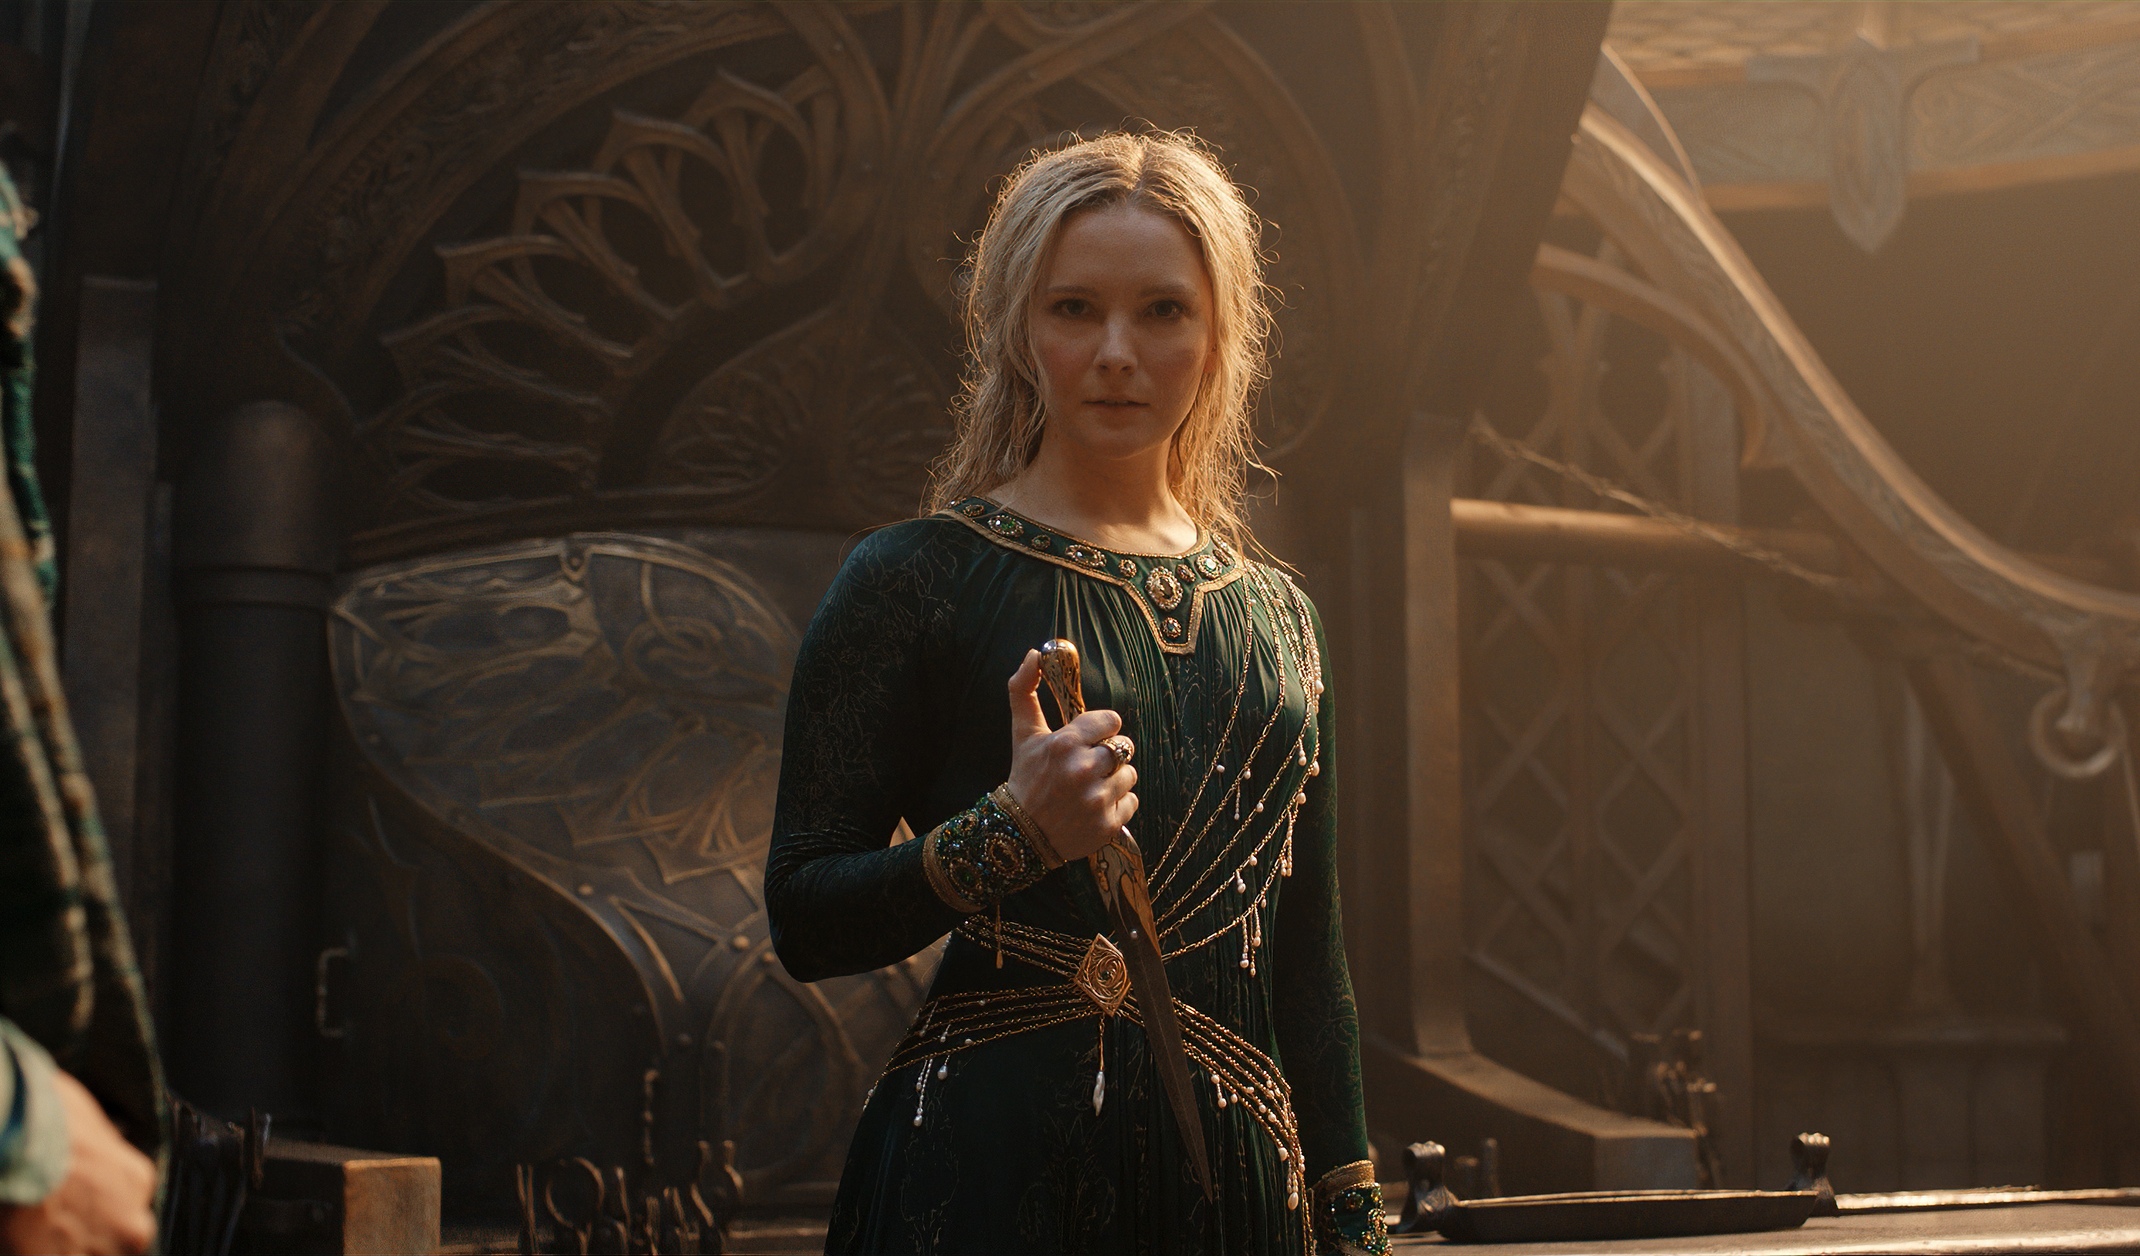 Fandom Imagines — Cate Blanchett as Galadriel - The Hobbit Made by...